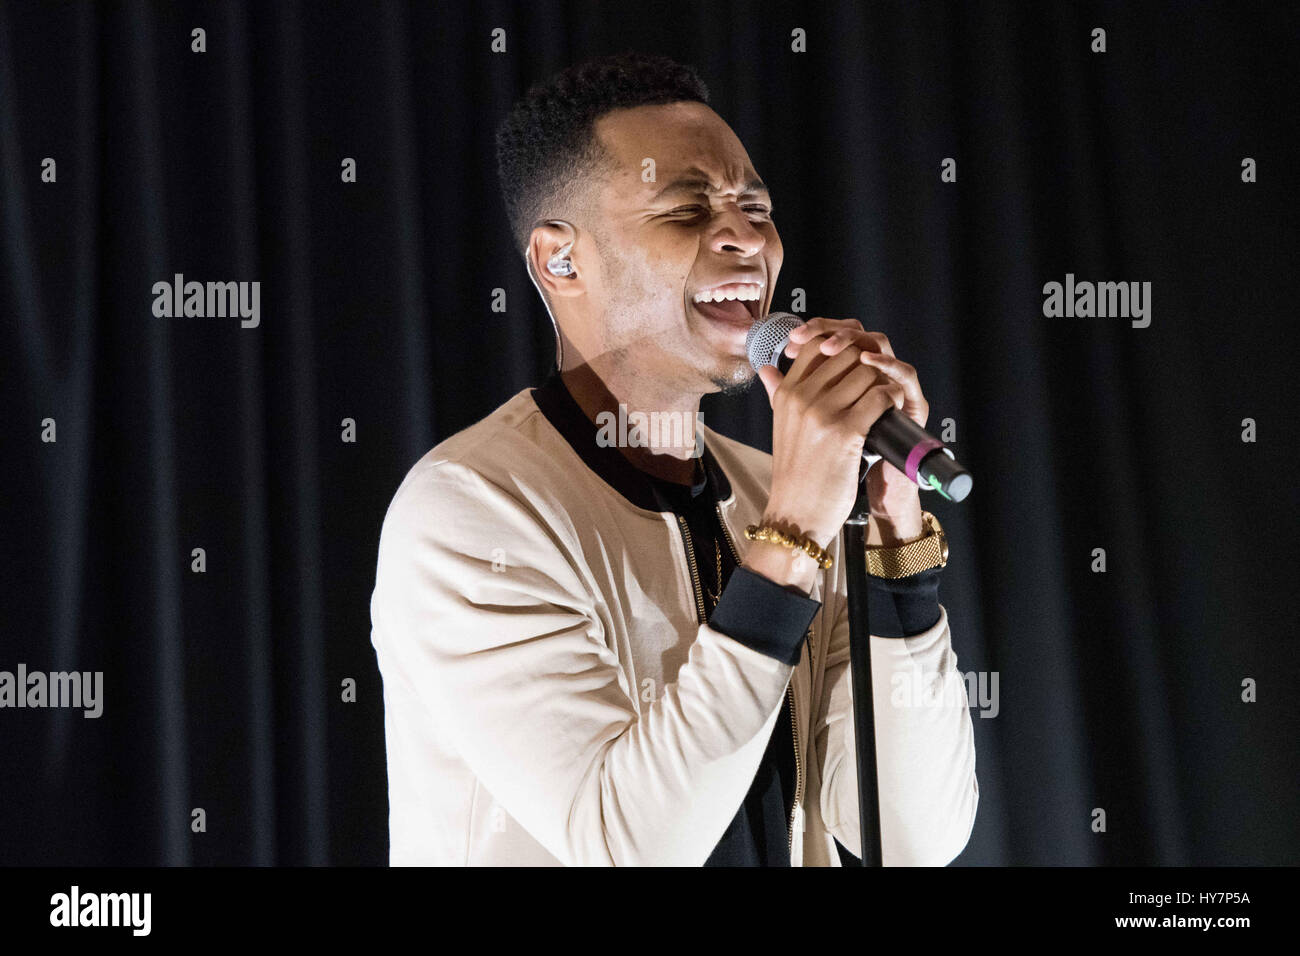 Philadelphia, Pennsylvania, USA. 1st Apr, 2017. R&B singer and Motown recording artist, KEVIN ROSS, performs at the WDAS Women of Excellence Award Luncheon held at the Sheraton Hotel in Philadelphia Pa It's theÂ 3rd Annual WDAS Women of Excellence Luncheon presentedÂ by Gwynedd Mercy University. Credit: Ricky Fitchett/ZUMA Wire/Alamy Live News Stock Photo